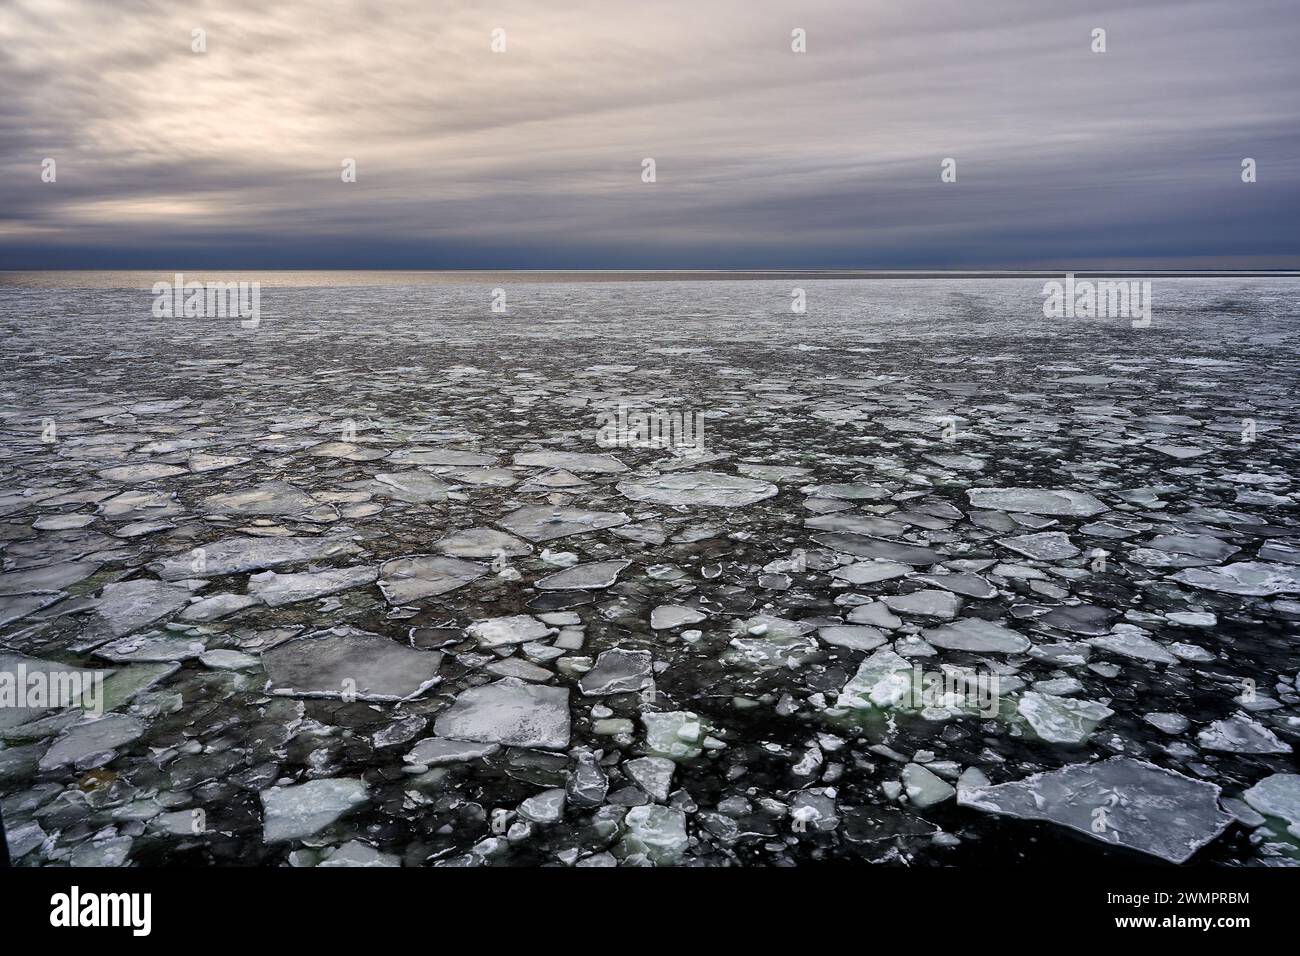 Frozen beach surrounded by ice floes, under cloudy skies Stock Photo